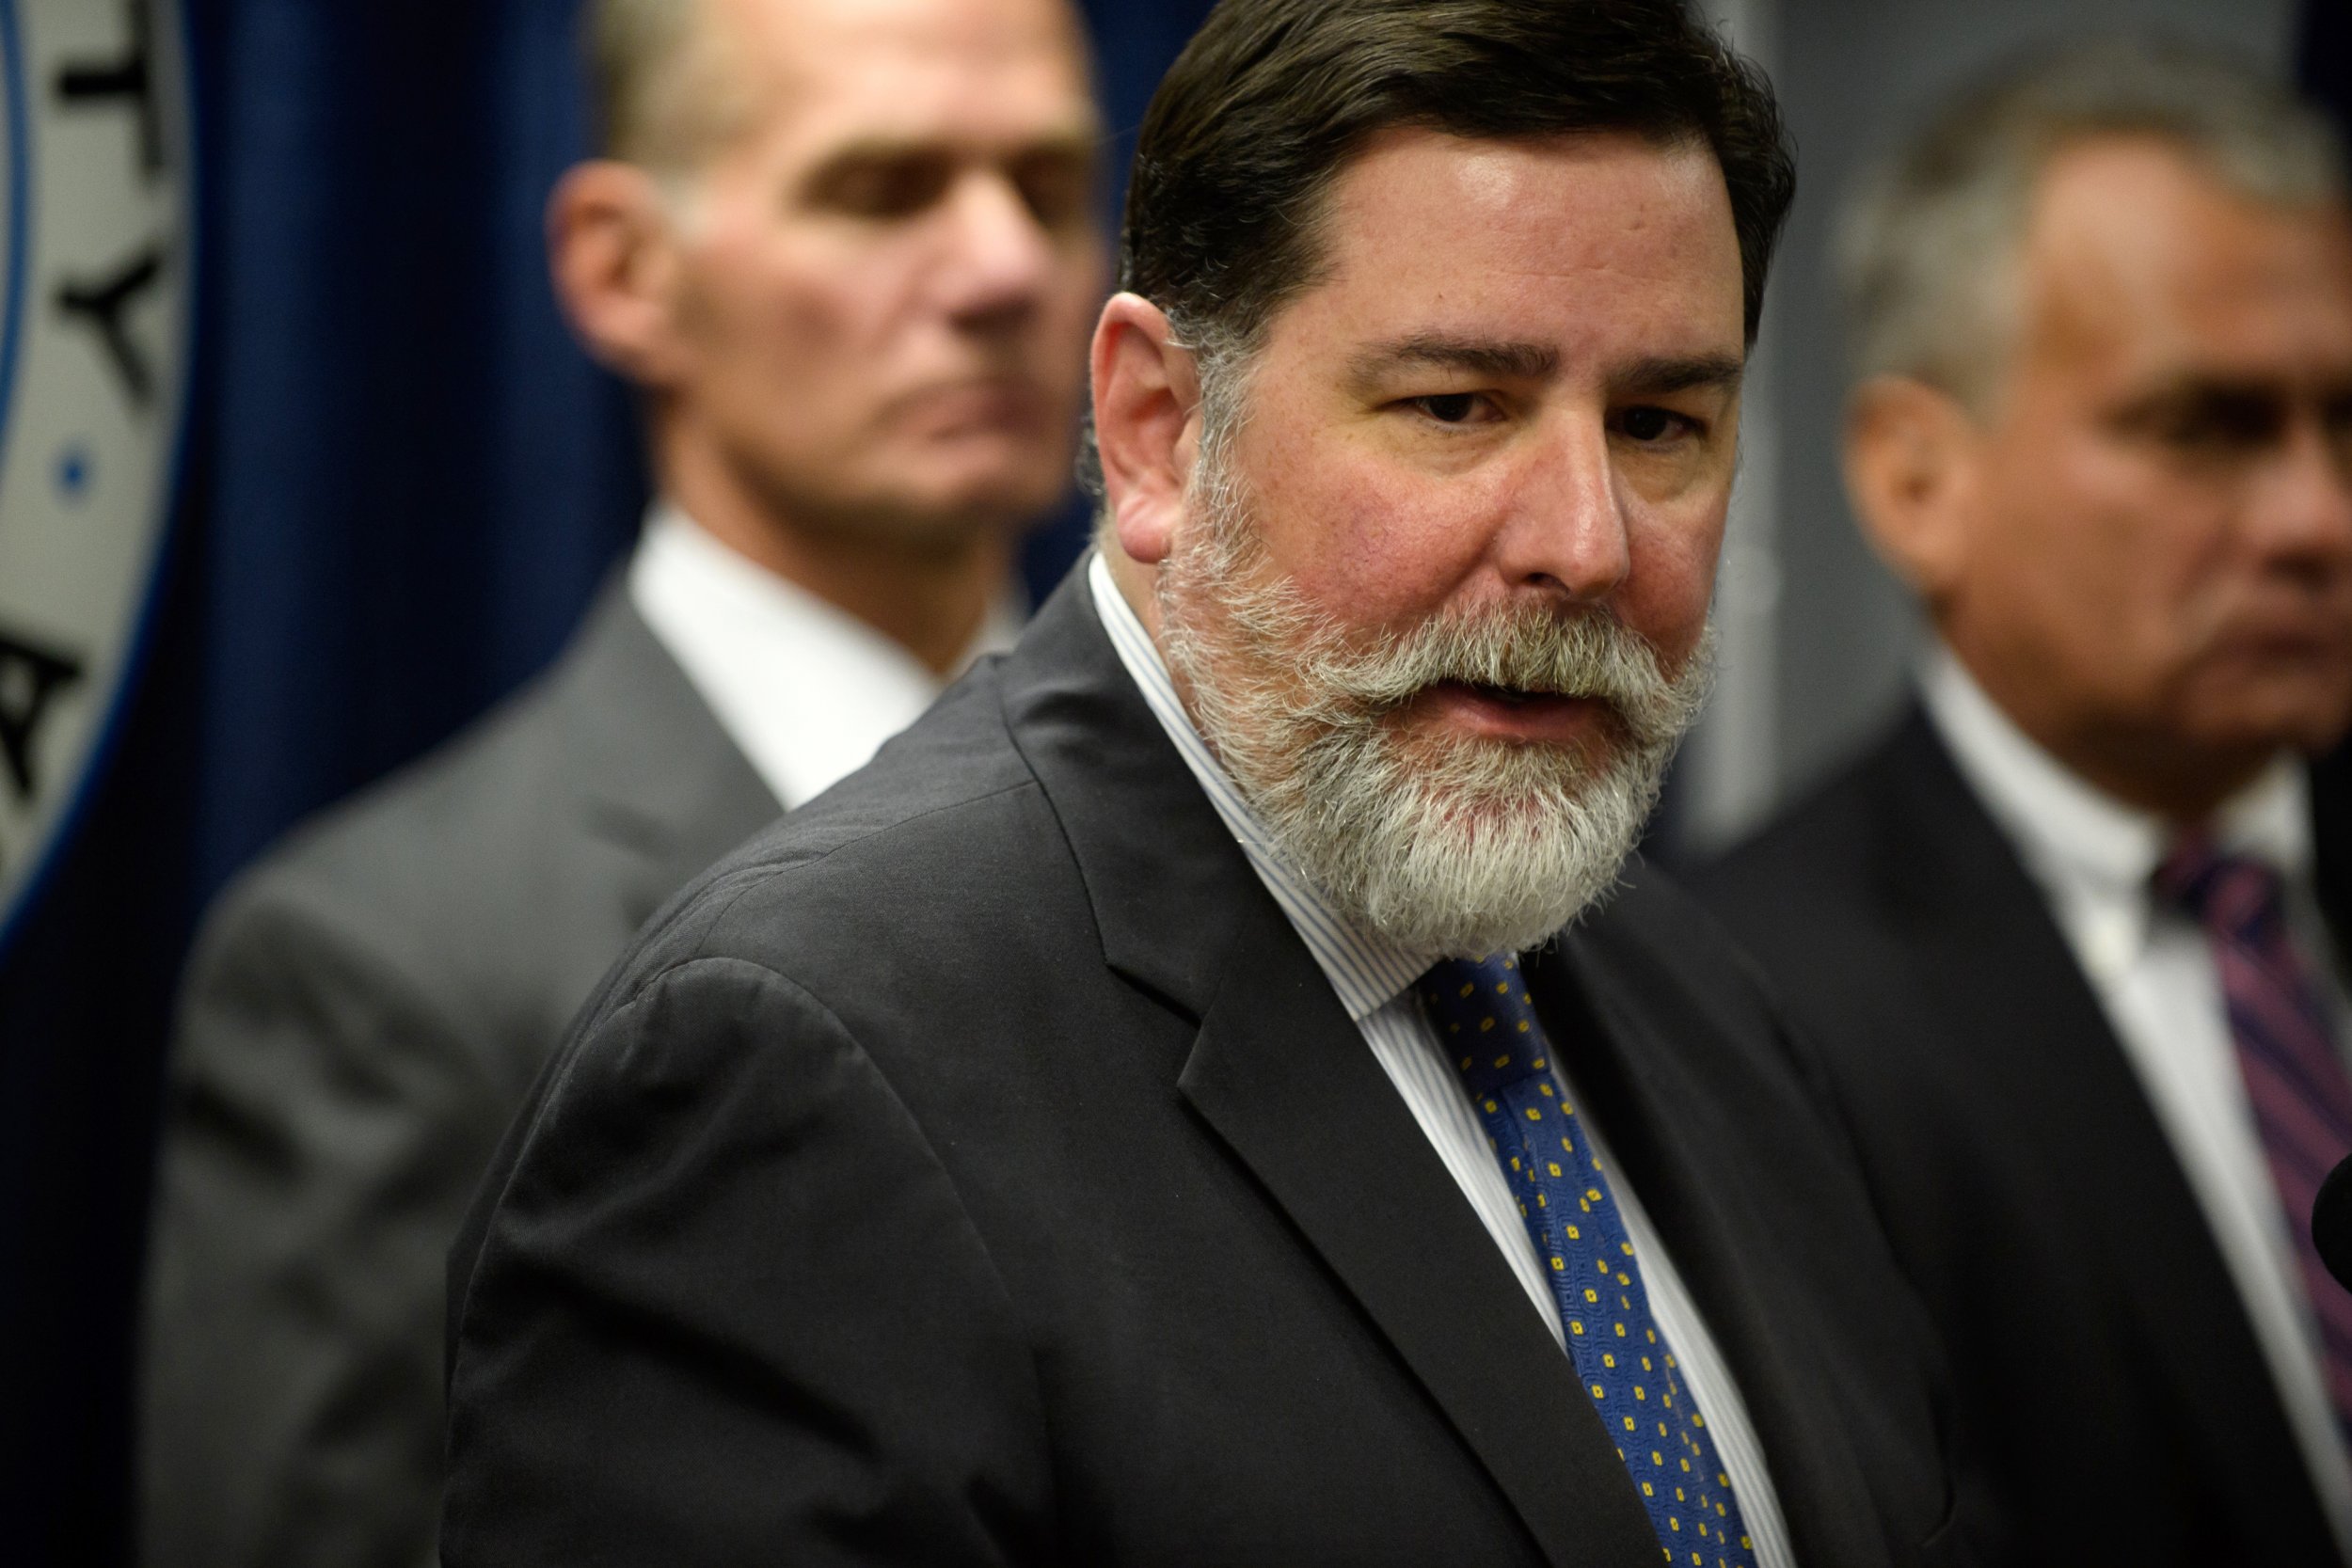 Pittsburgh Mayor Responds to Donald Trump’s Call for Churches, Synagogues to be Armed: Guns Are Not the Solution 